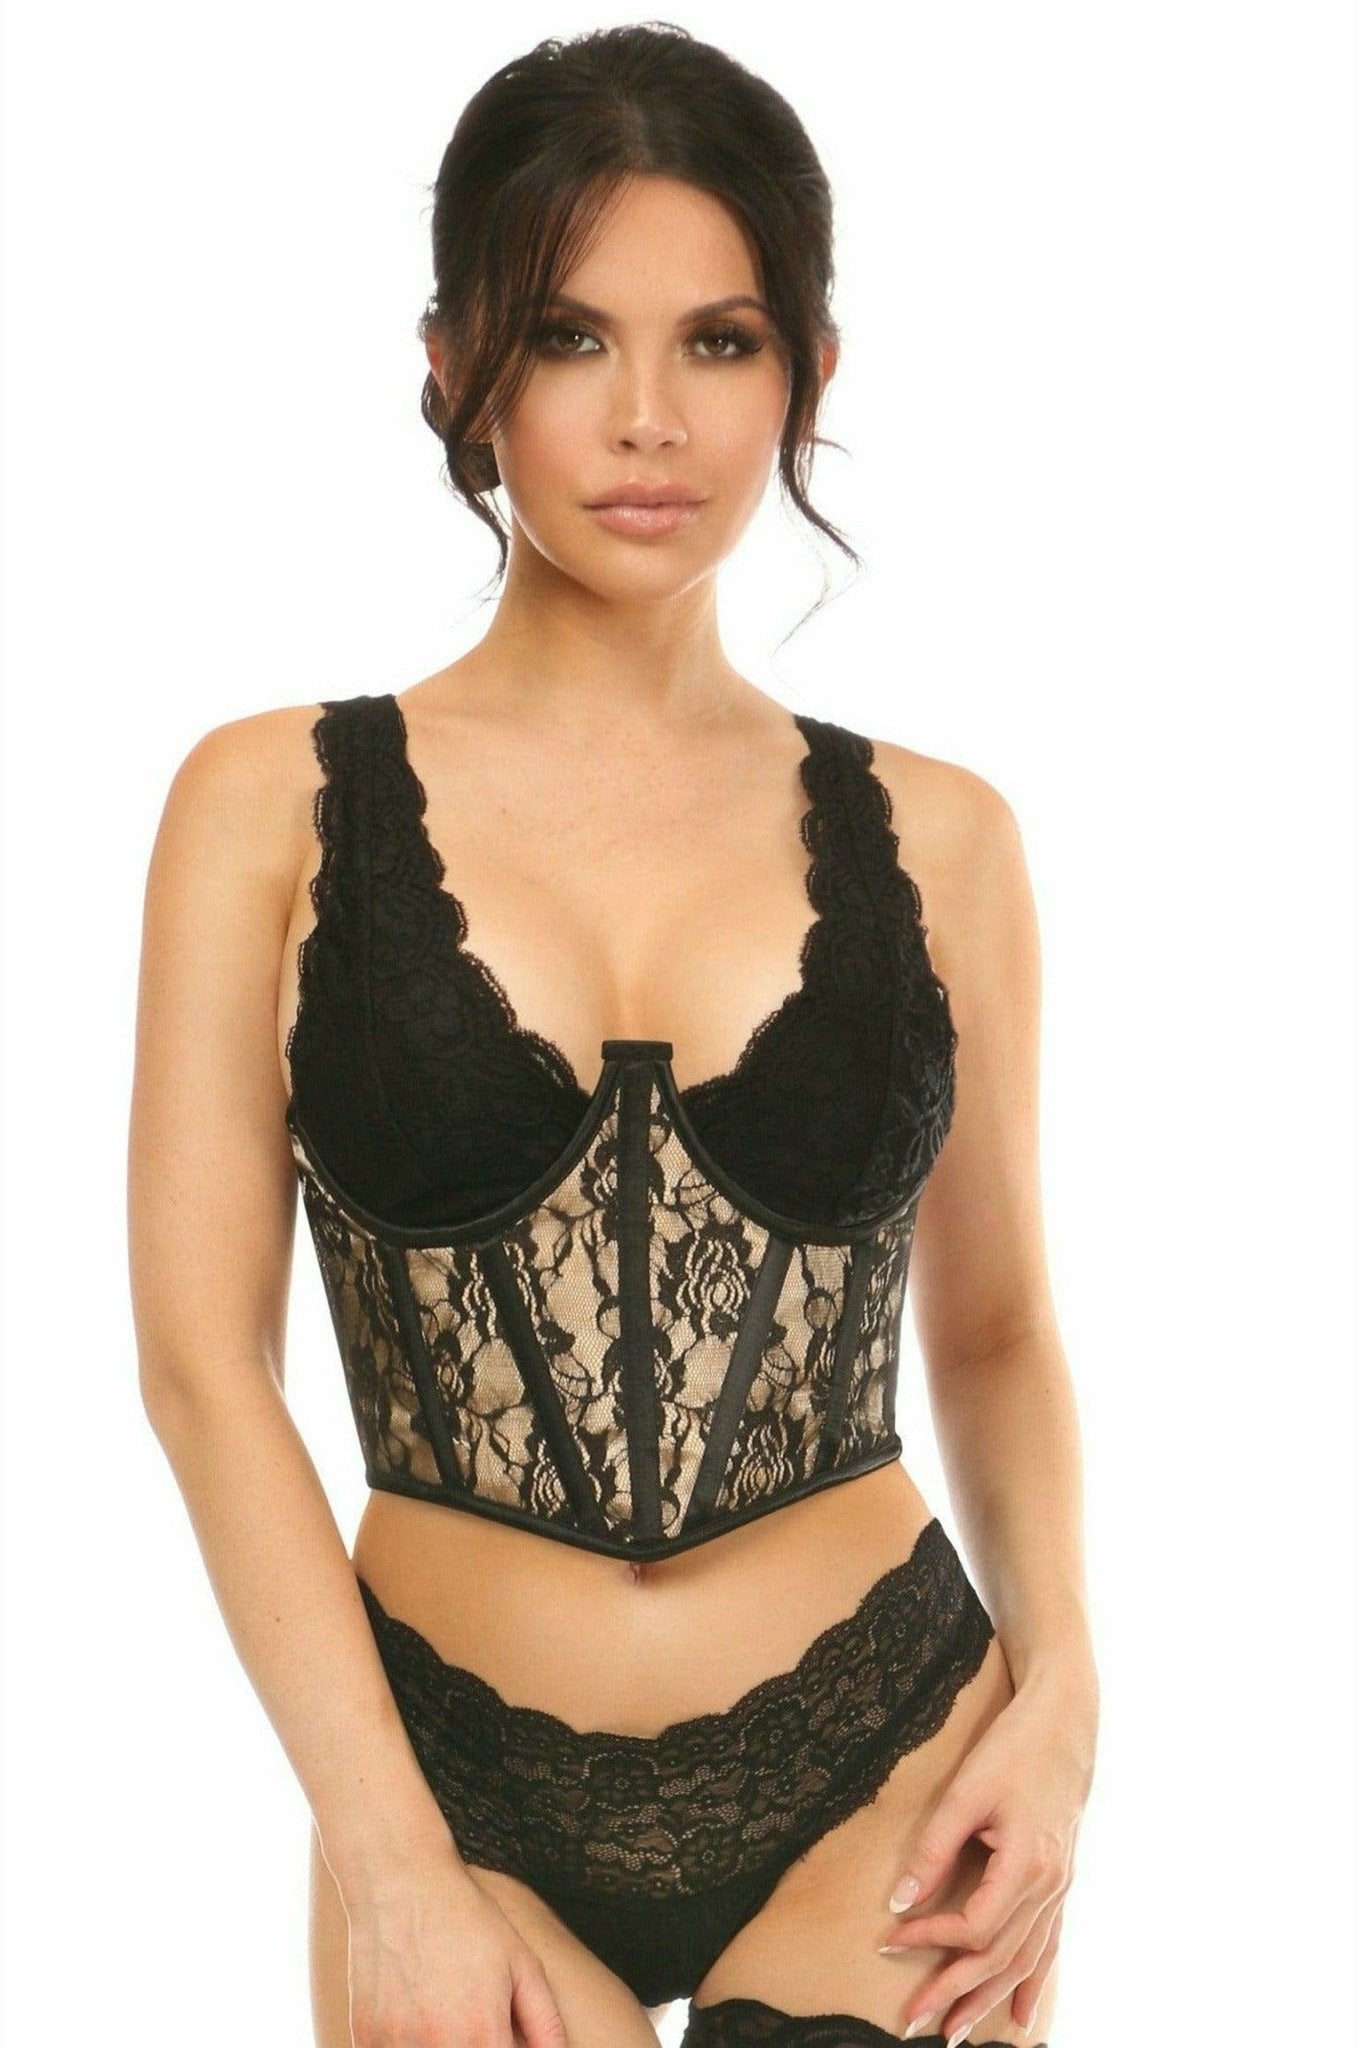 Sexy Tan with Black Lace Overlay Open Cup Waist Cincher Musotica.com